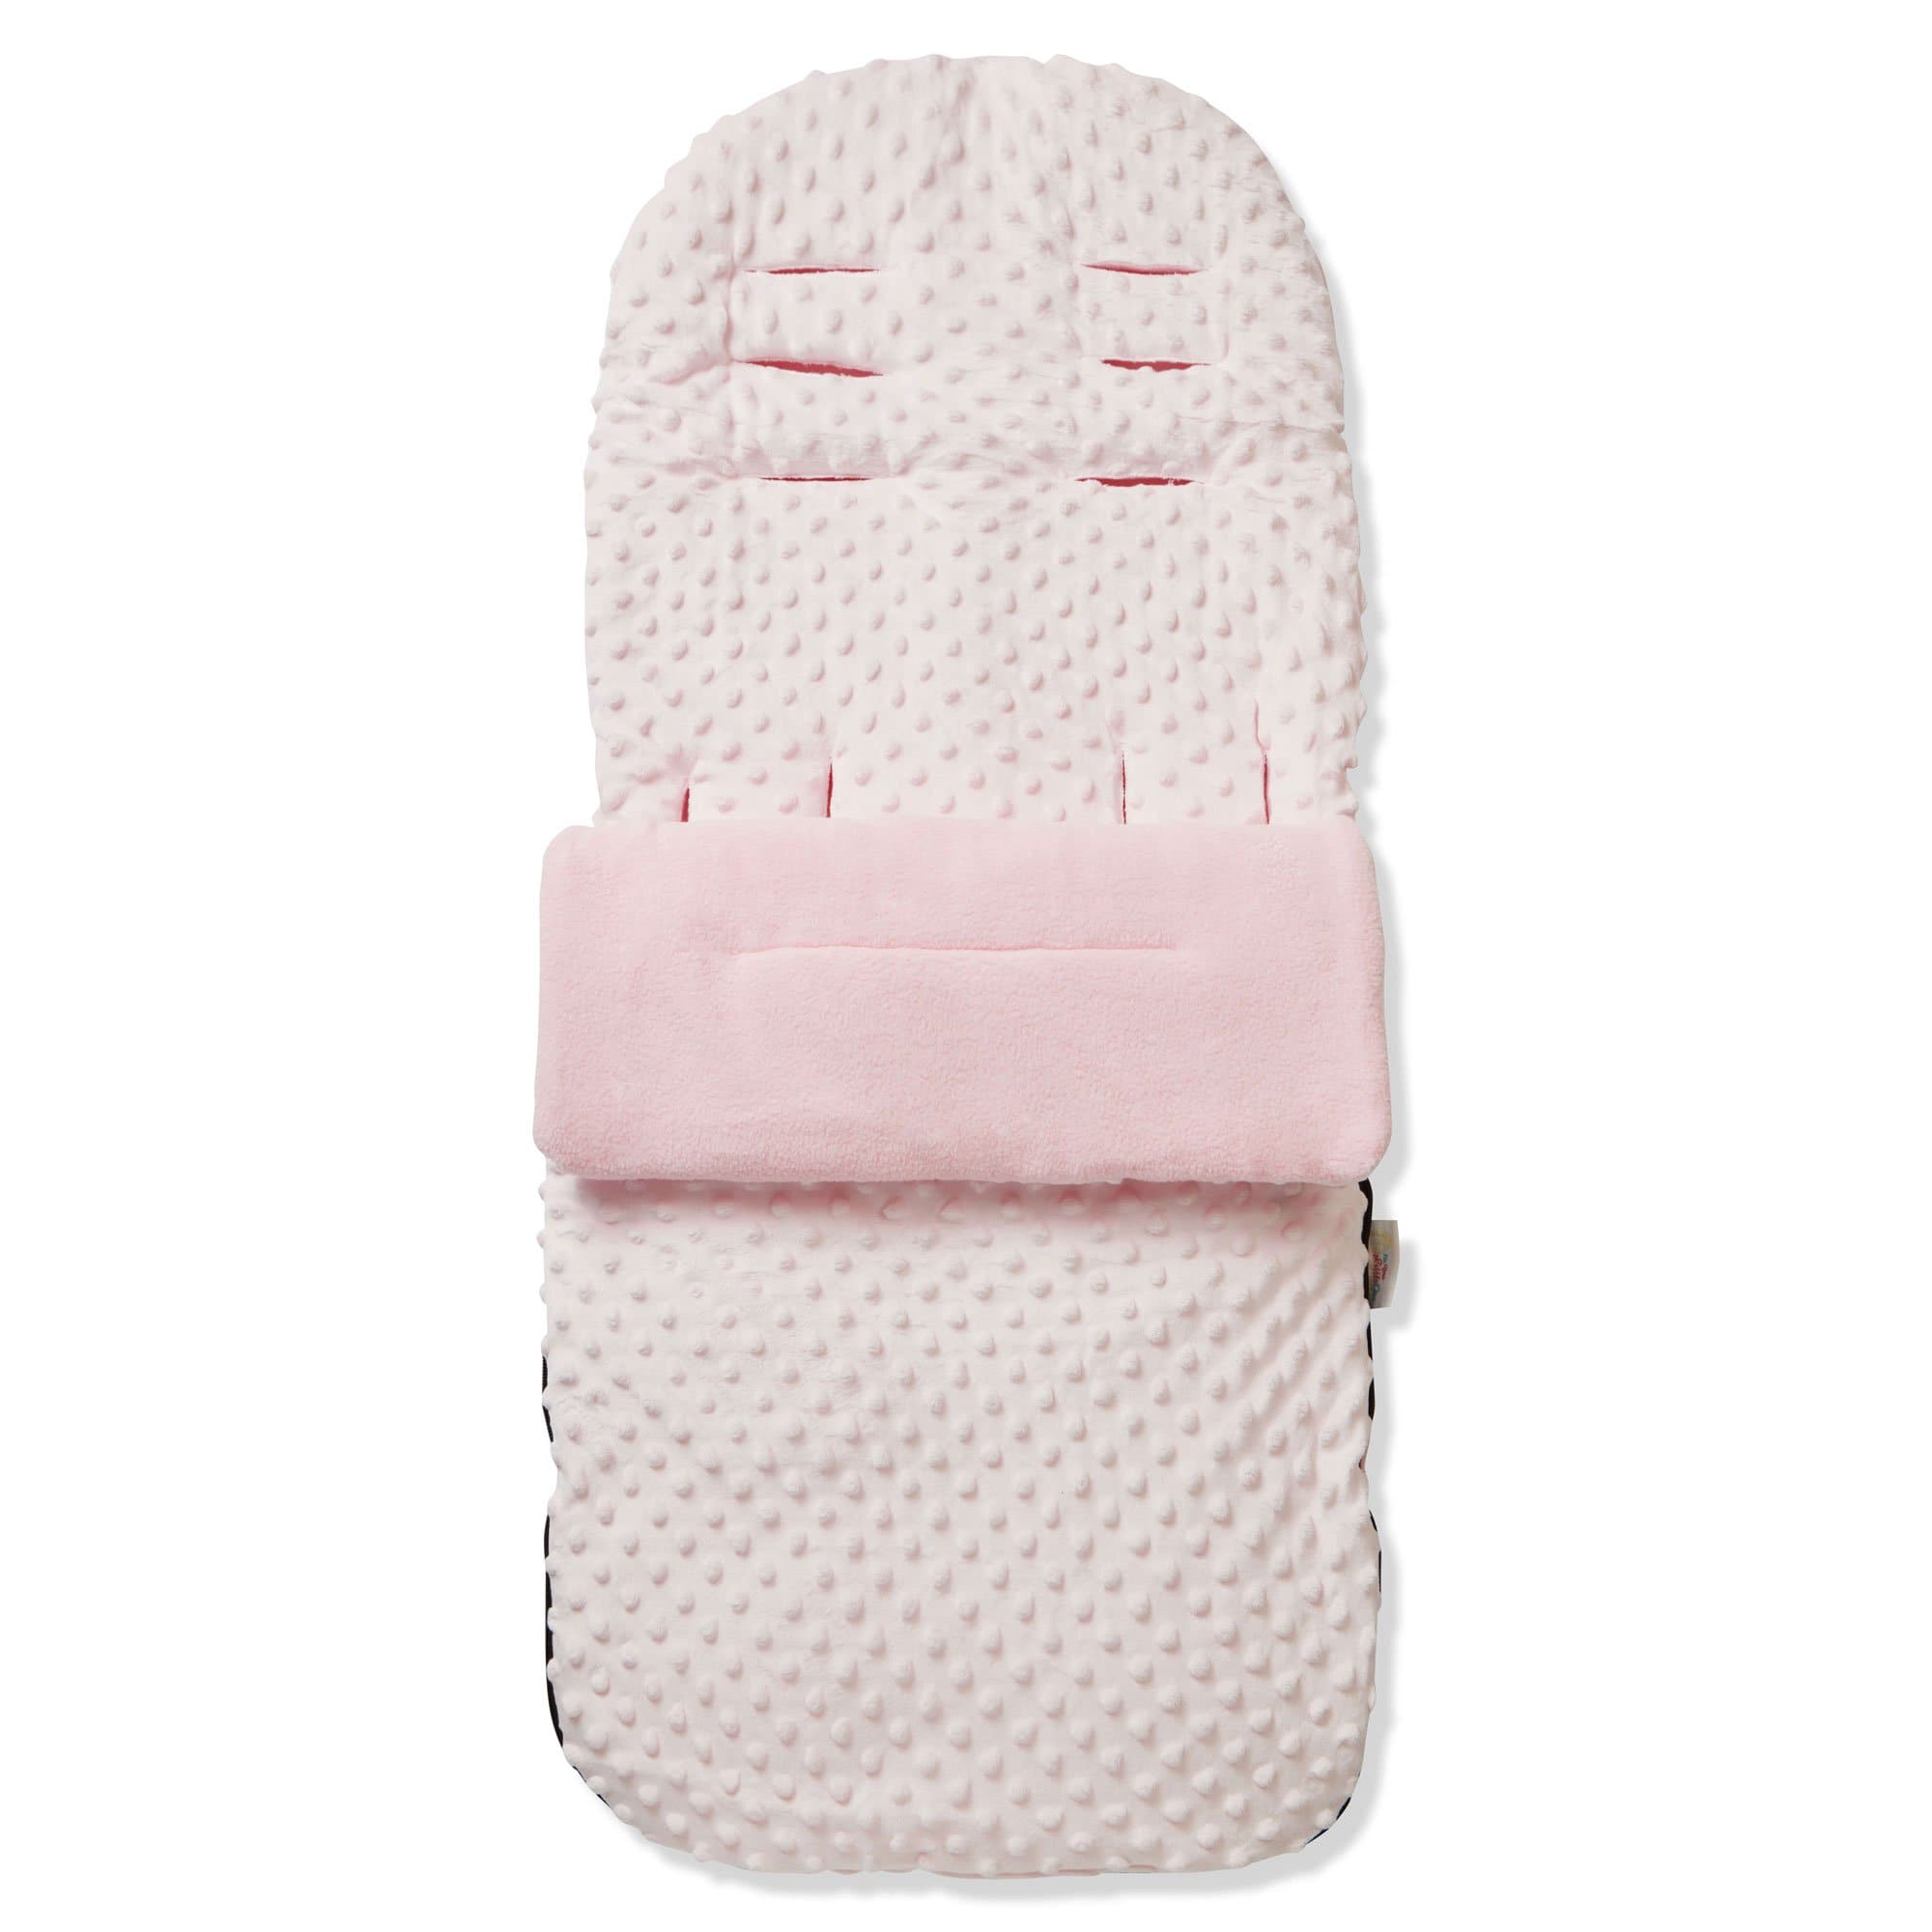 Dimple Footmuff / Cosy Toes Compatible with Hybrid - For Your Little One